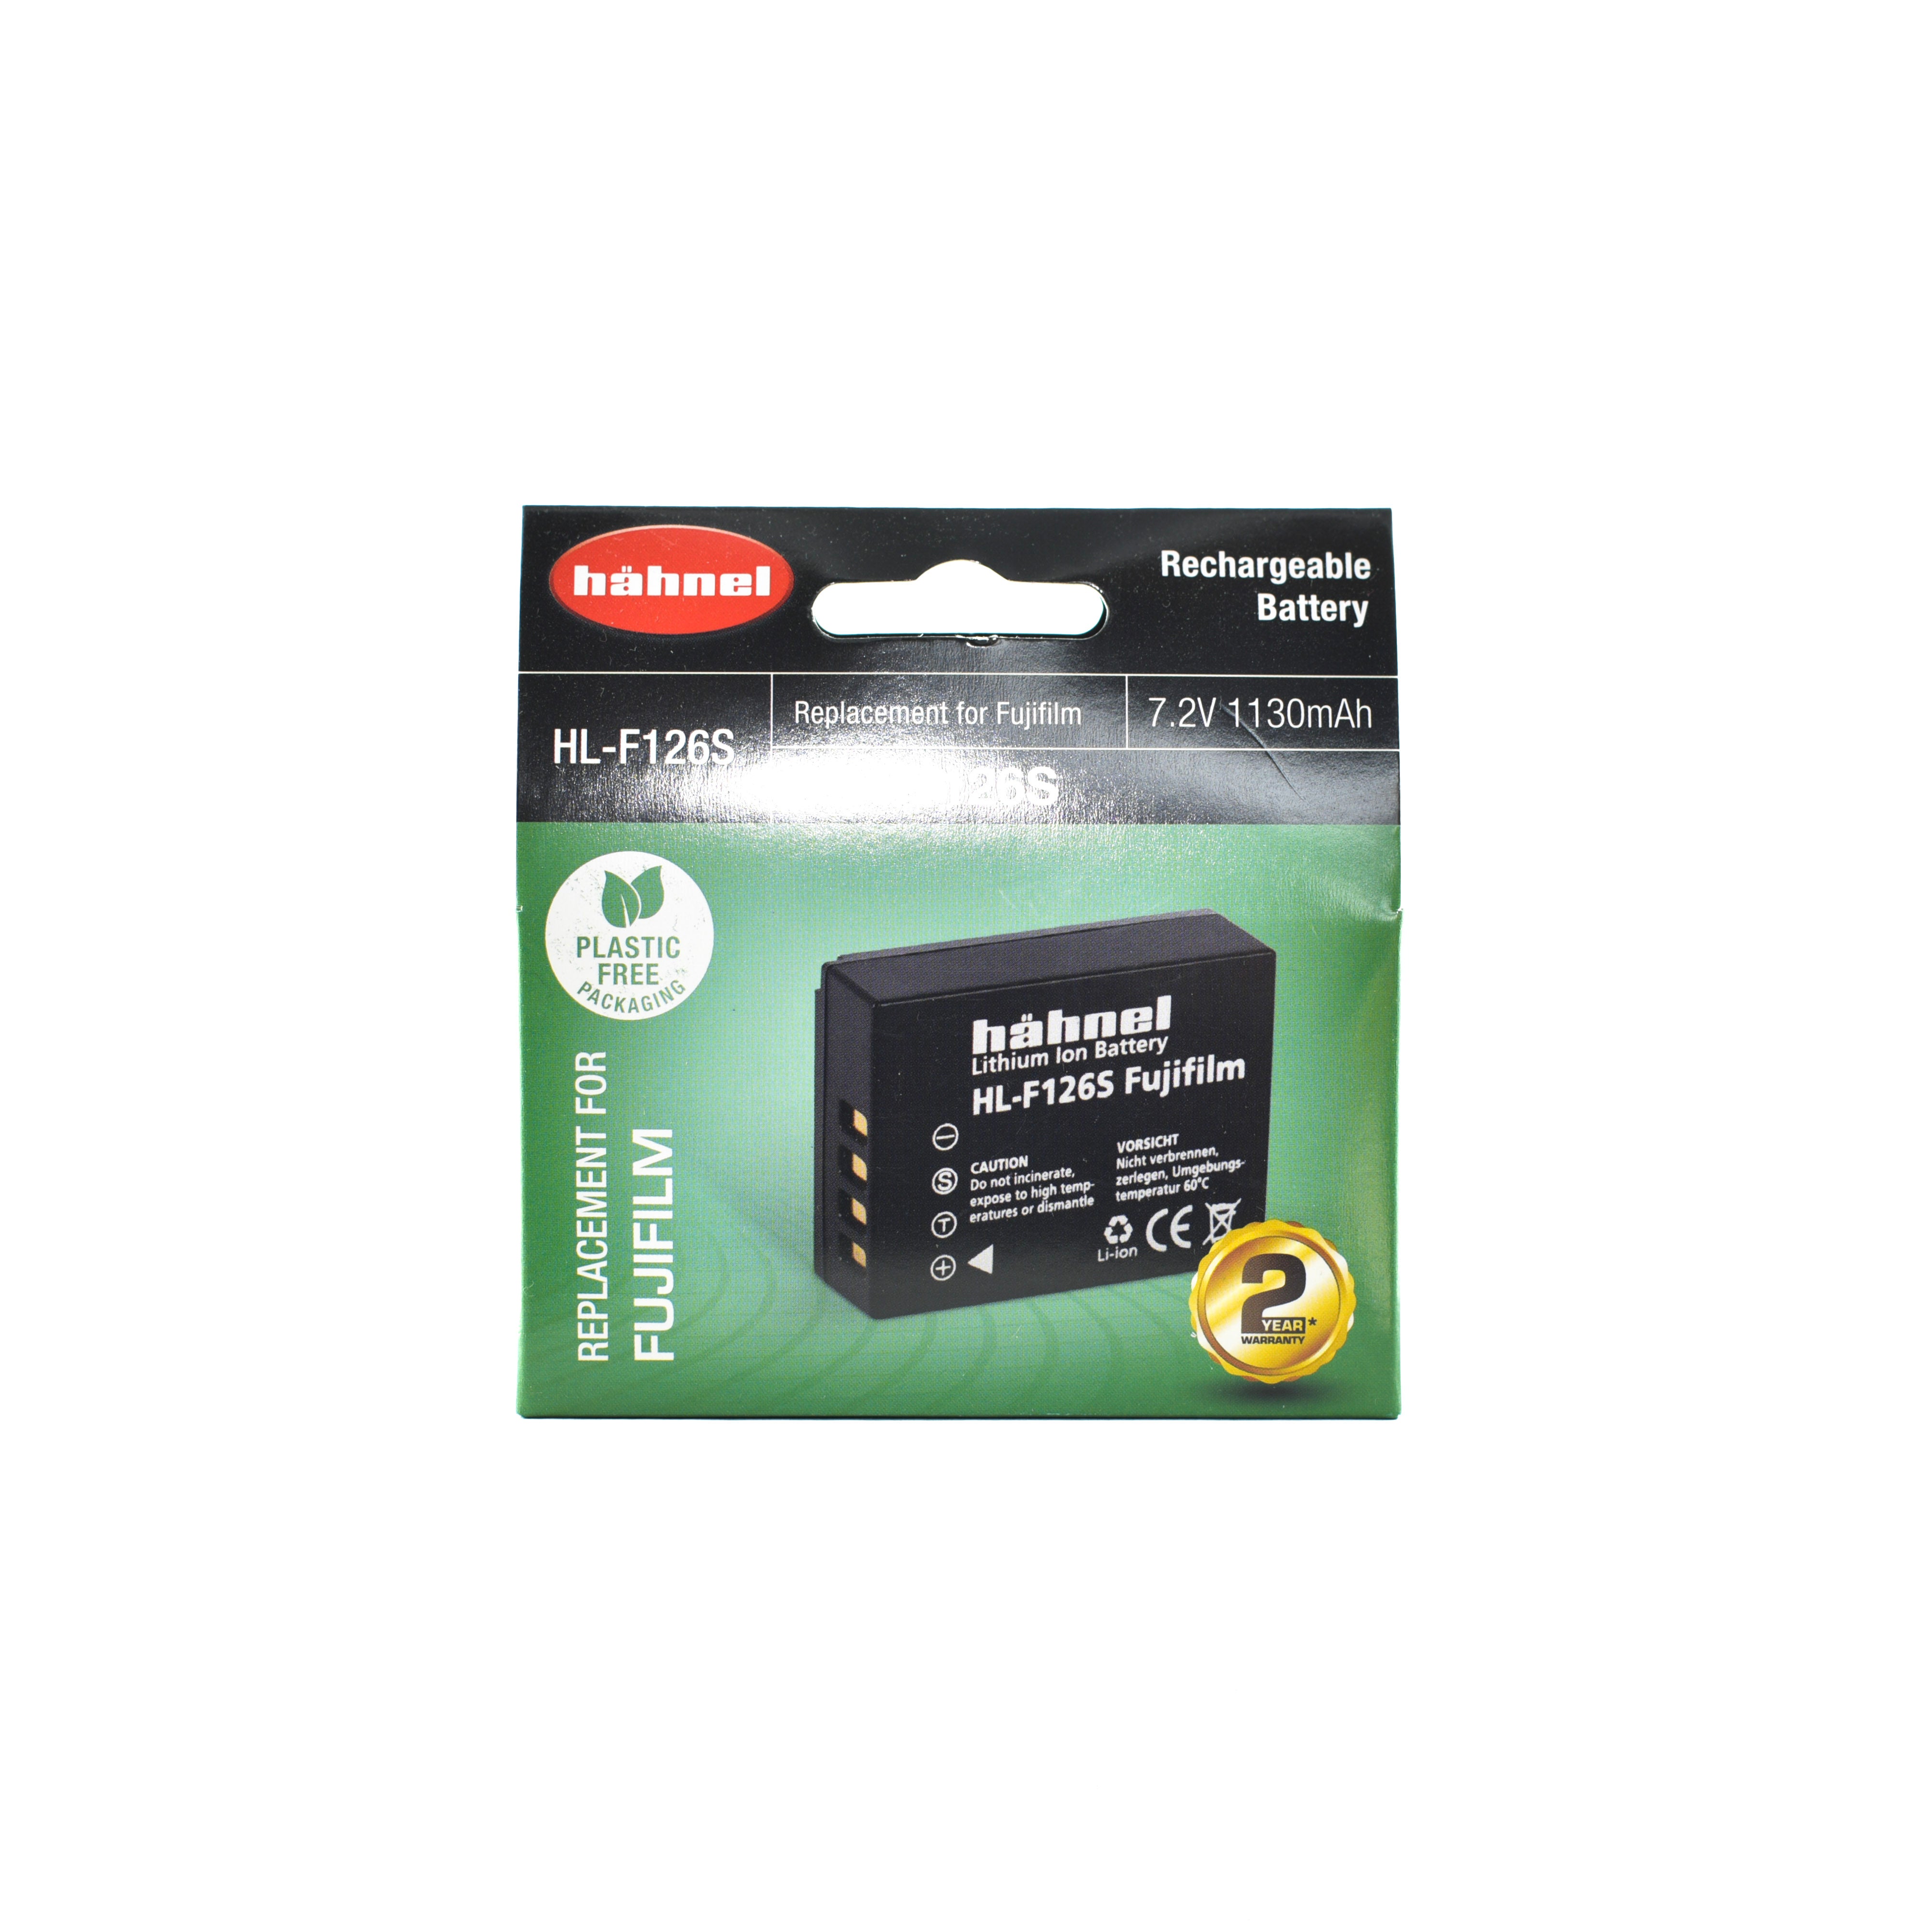 Hahnel HL-F126S (Fuji NP-W126S) Battery